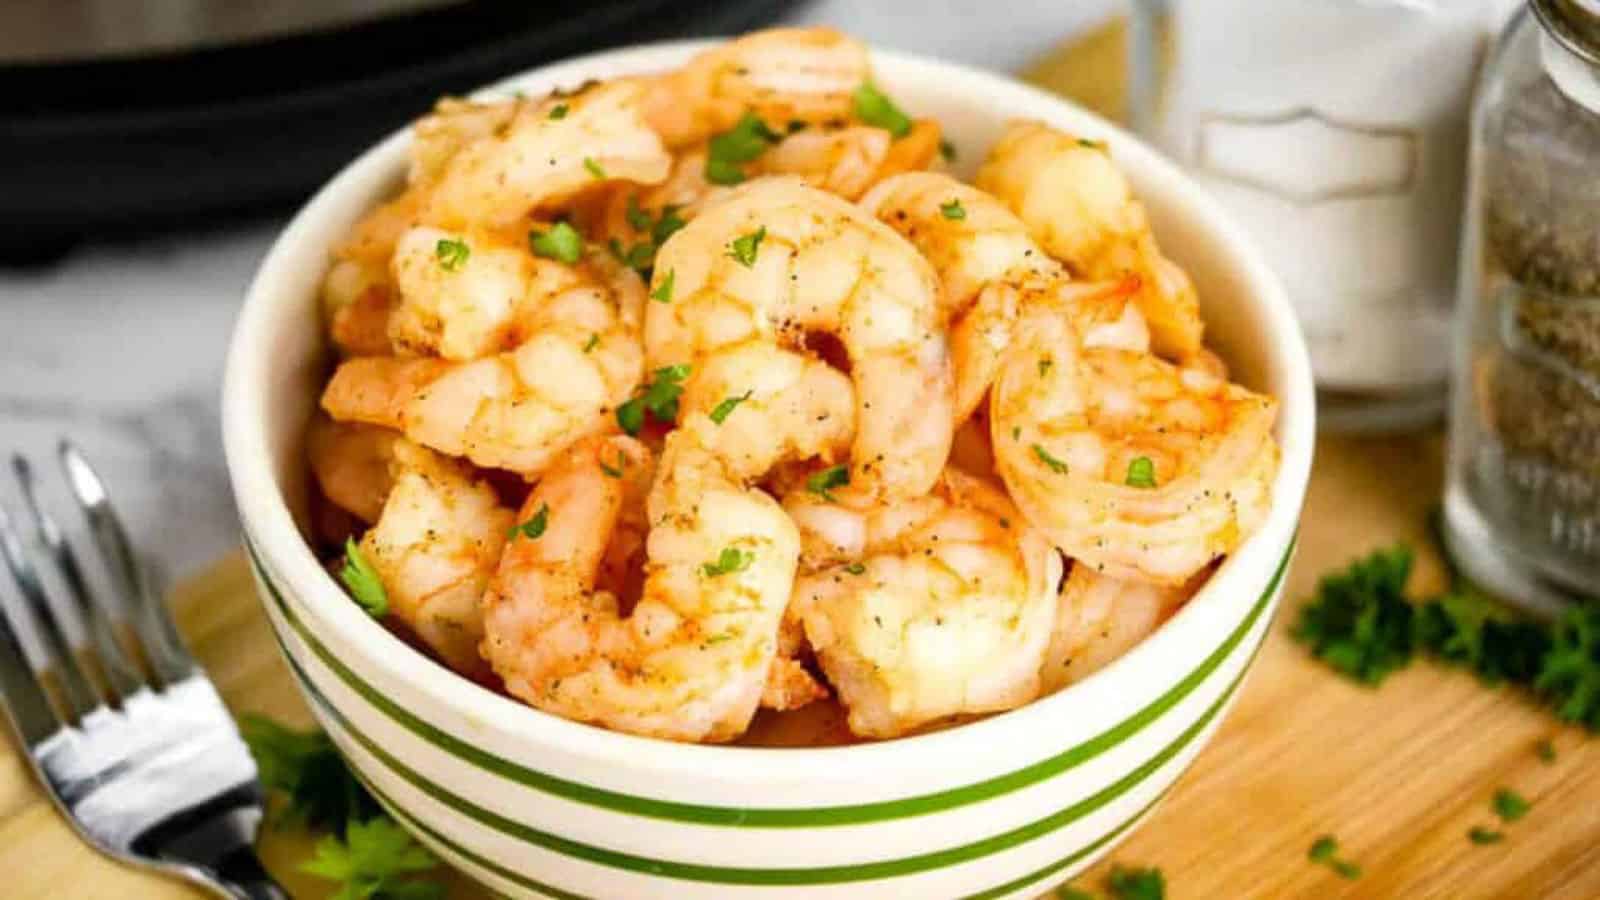 Cooked shrimp in a green and white striped bowl, garnished with parsley.